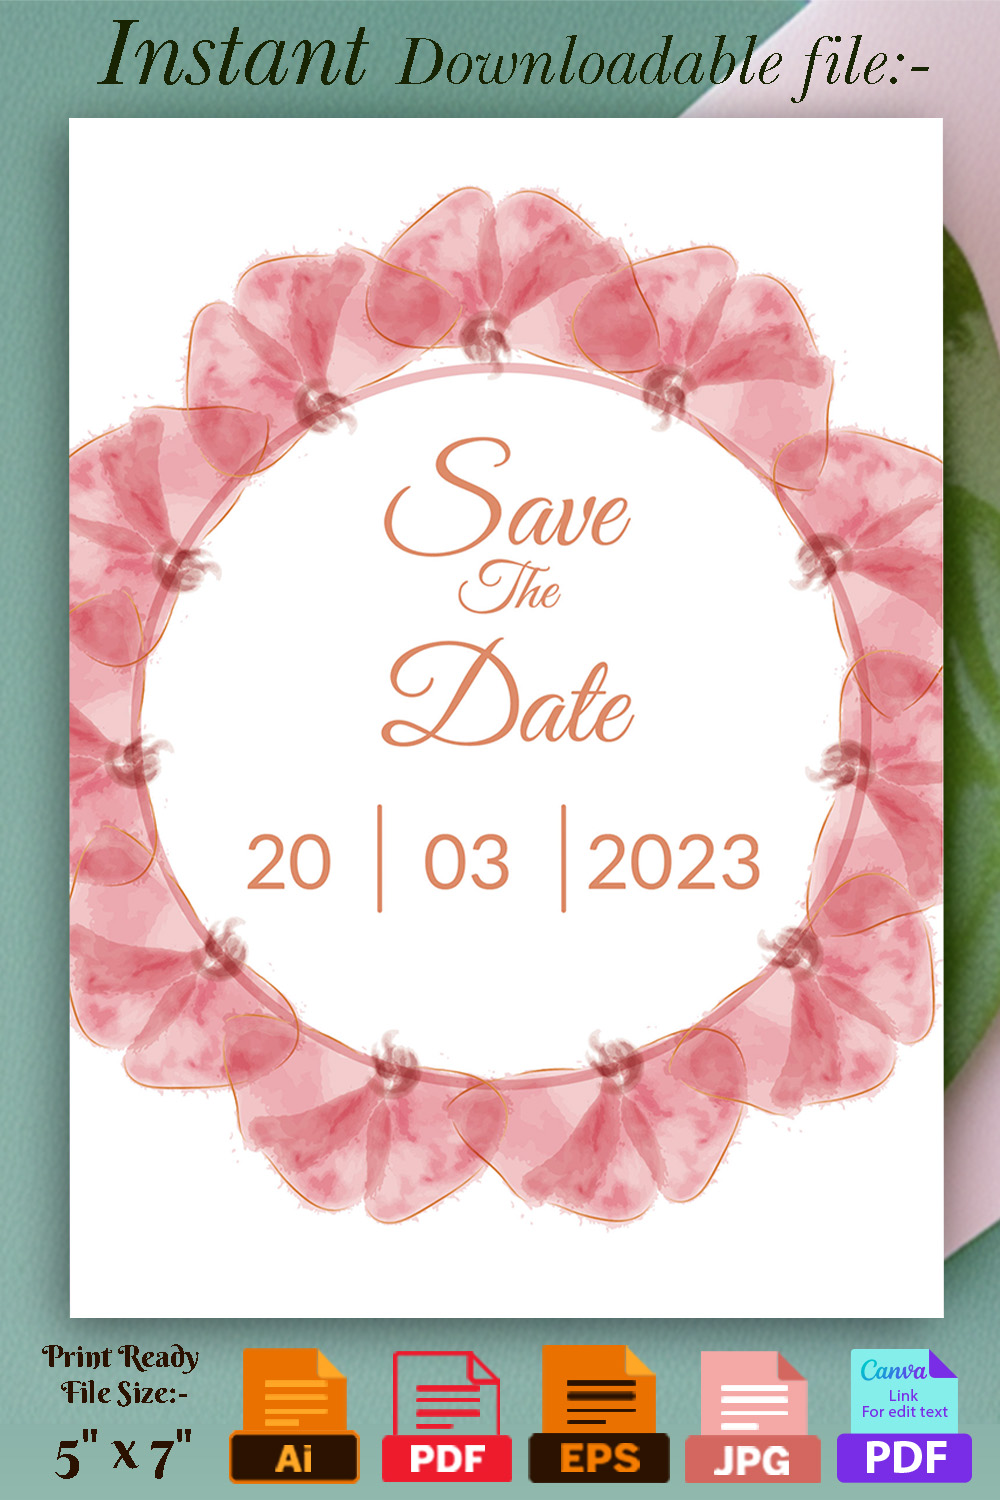 Image with charming wedding invitation card in pink tones and flowers.